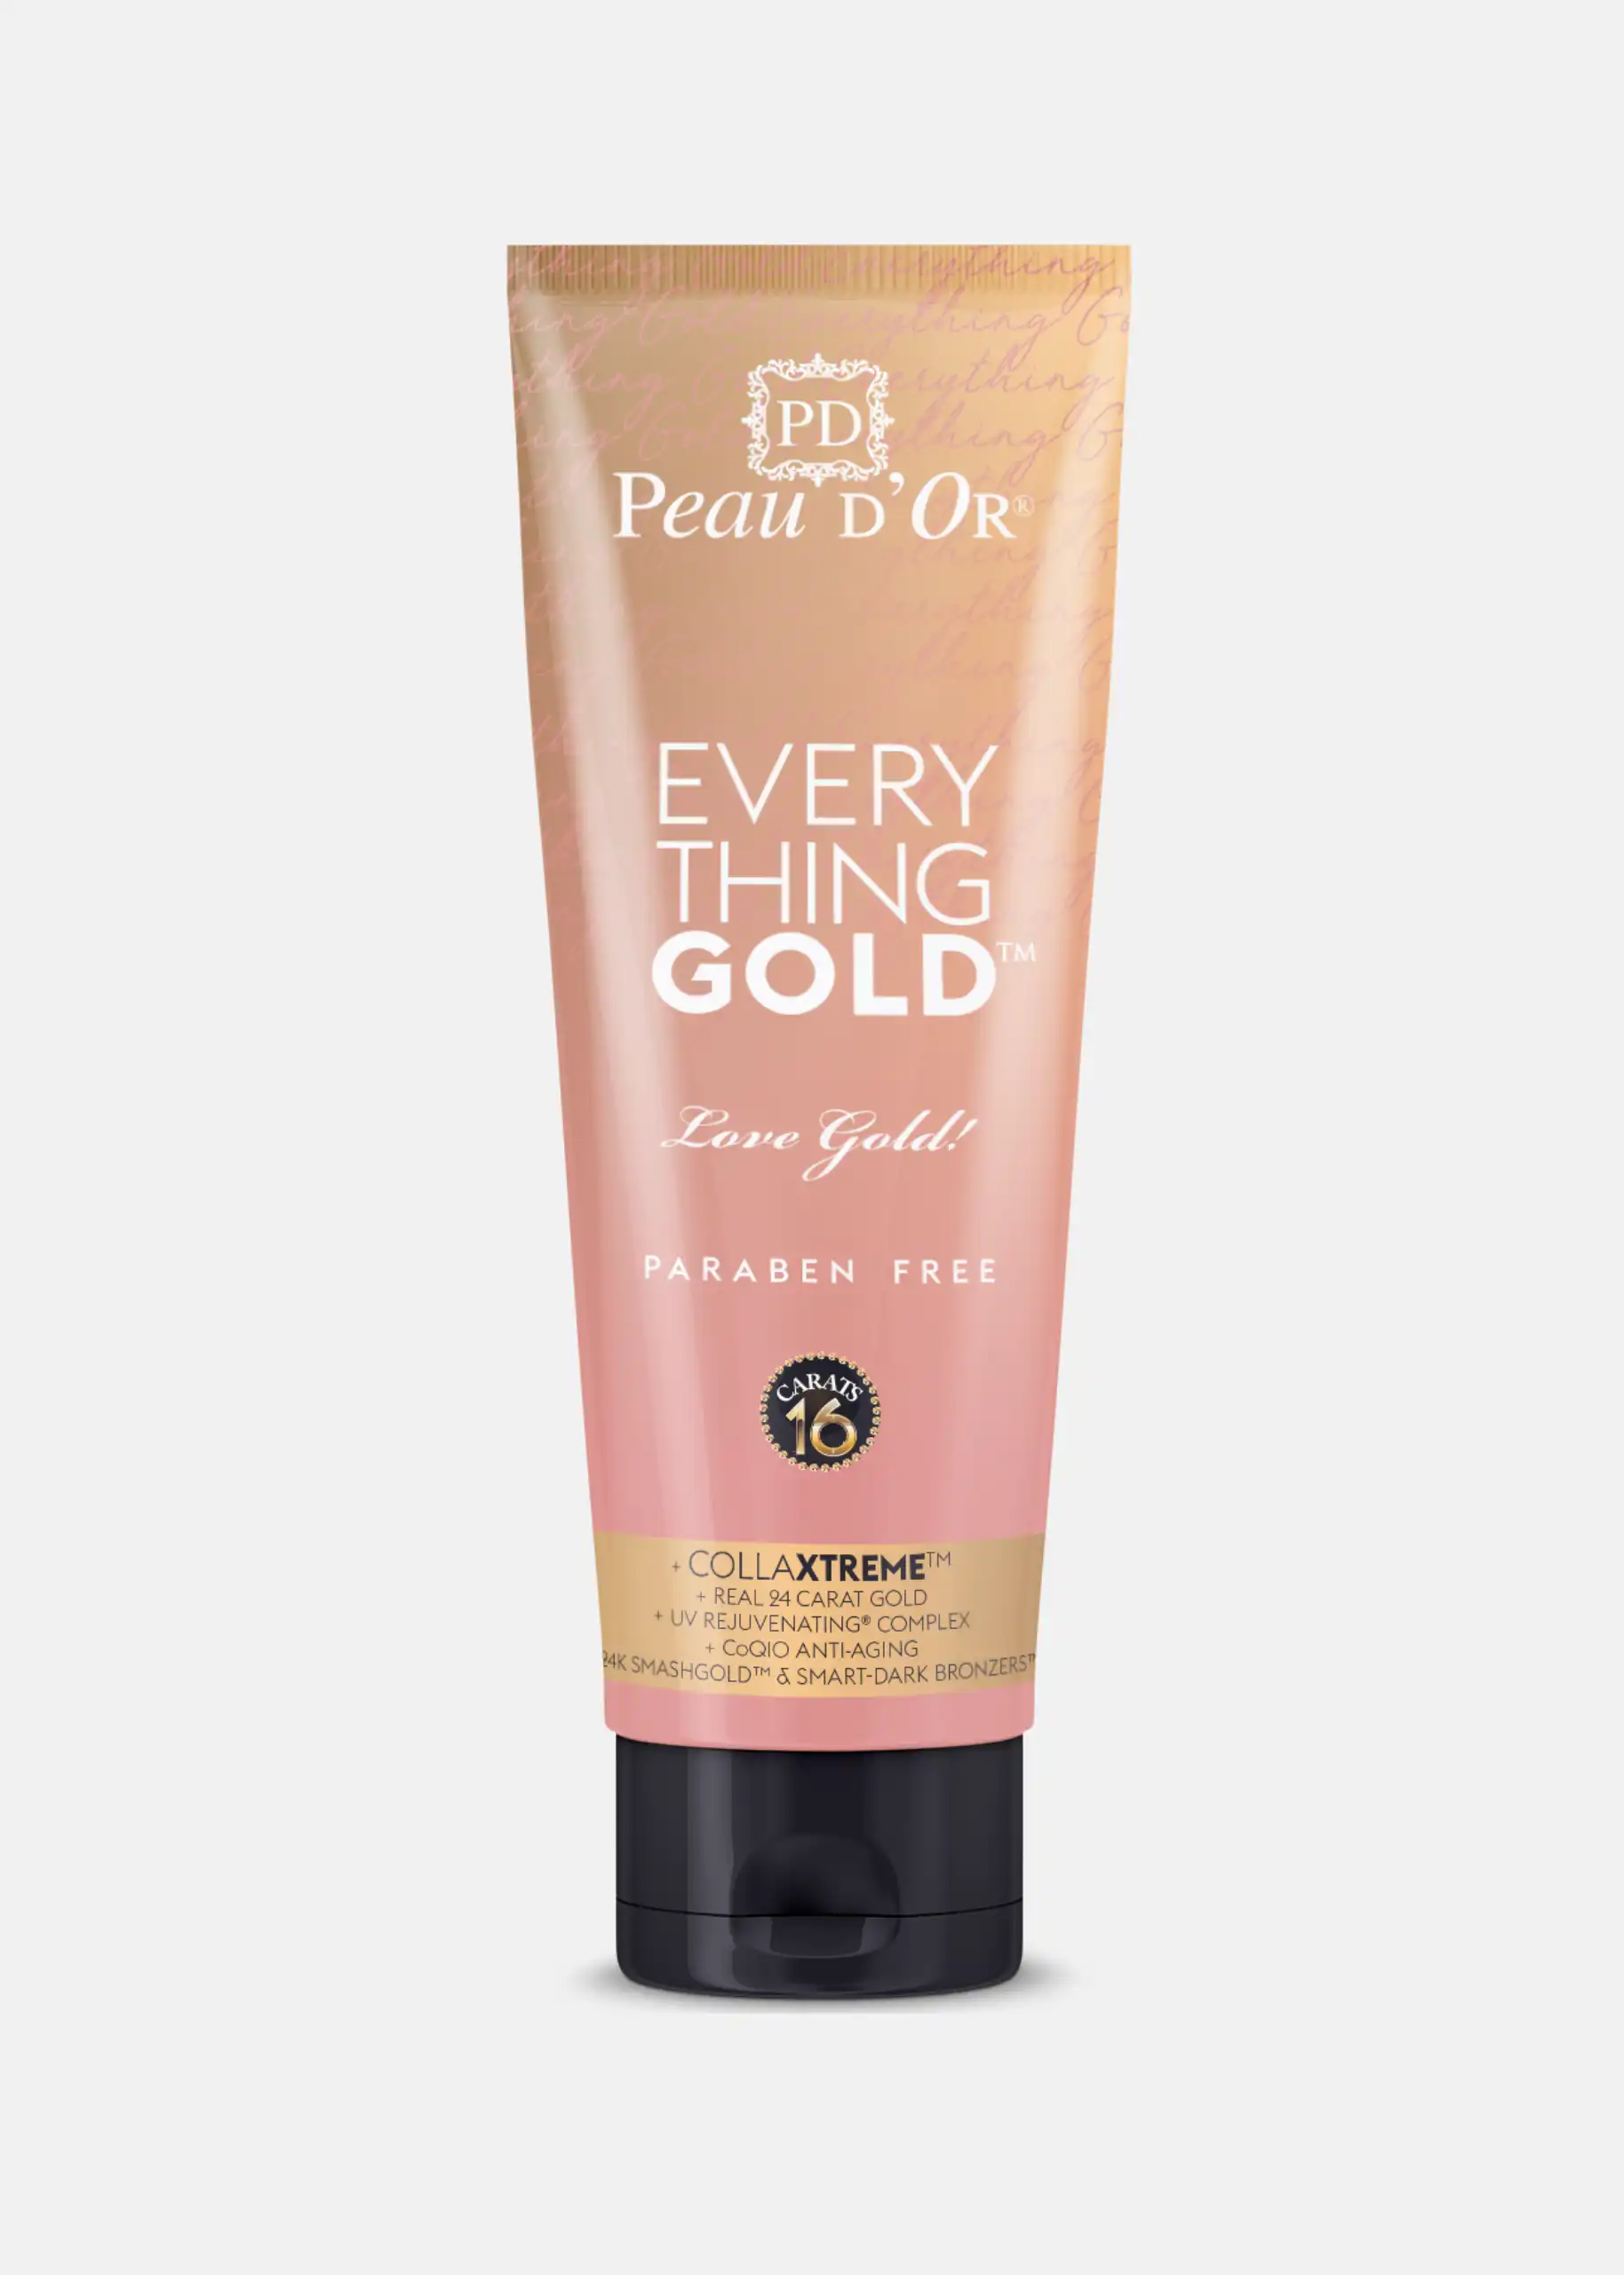 Everything Gold flacone Peau D'Or